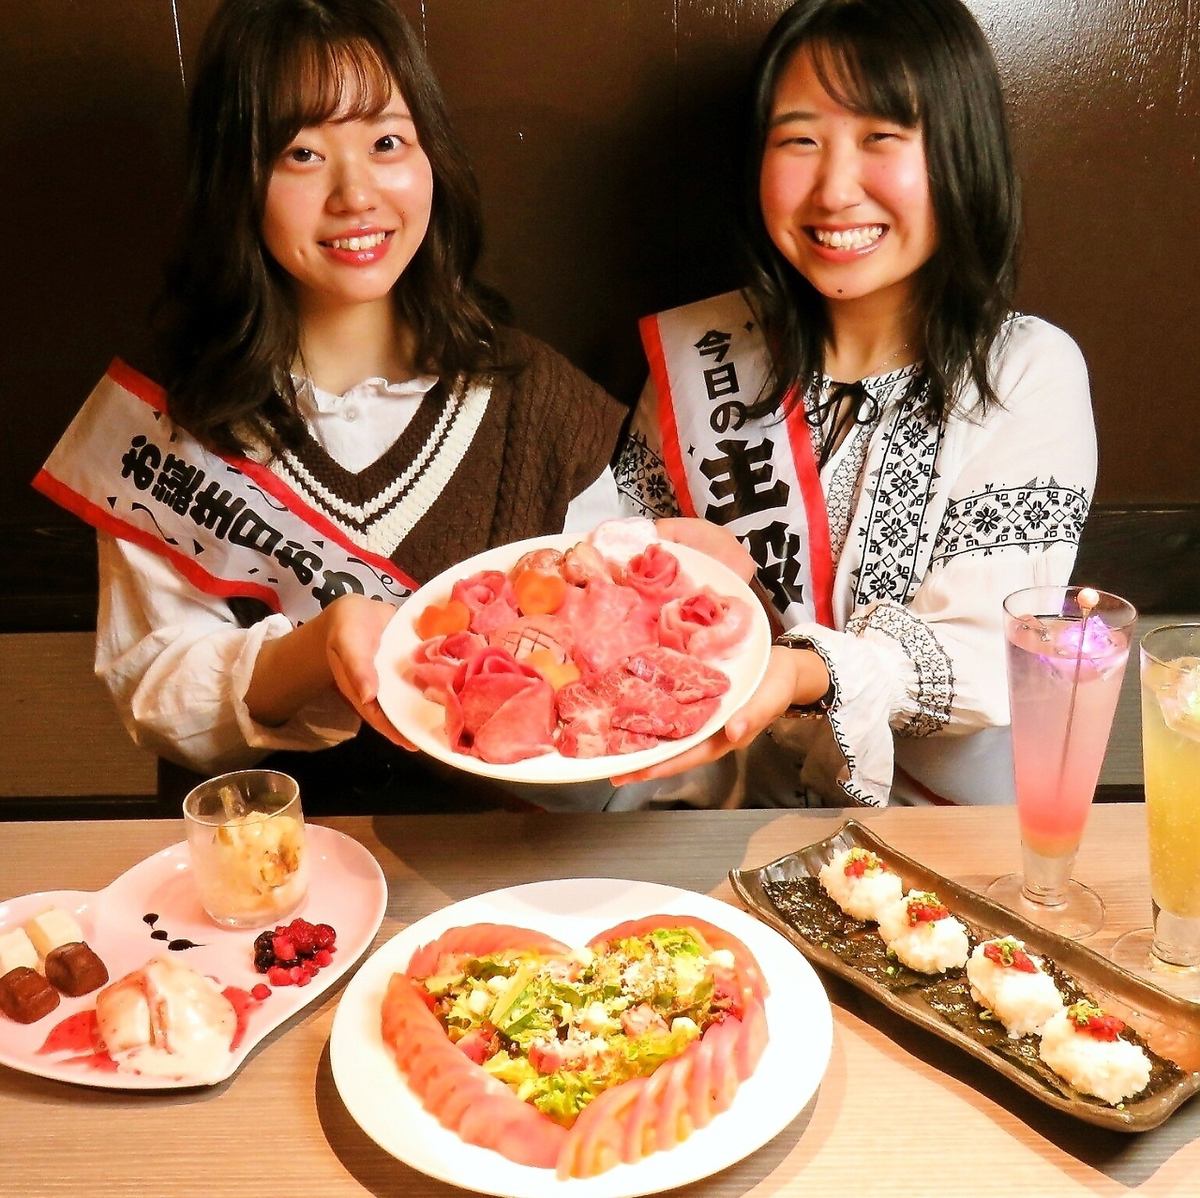 Birthday/Anniversary Celebration Course 3,850 yen (tax included) with 9 dishes and one drink